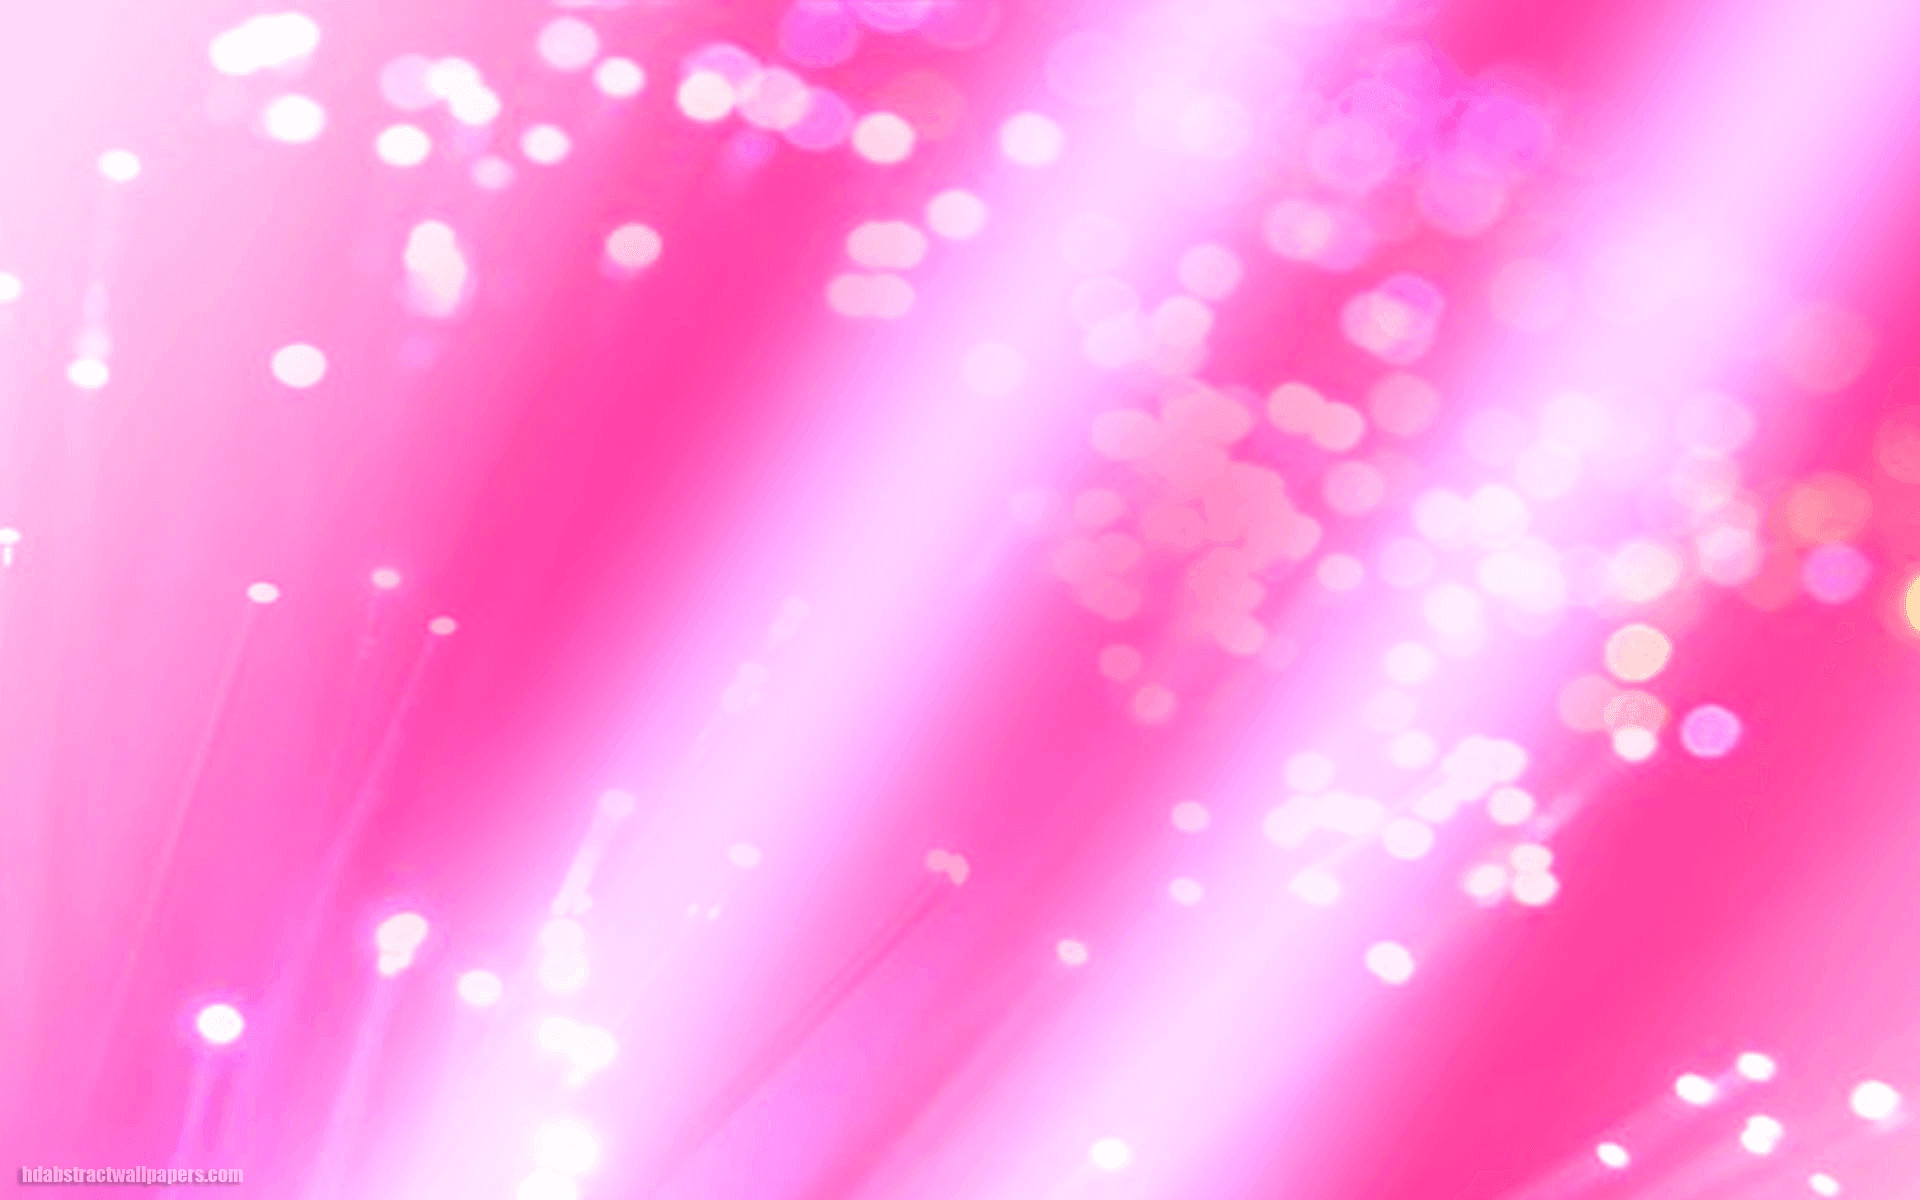 Pink abstract wallpaper with lights and circles